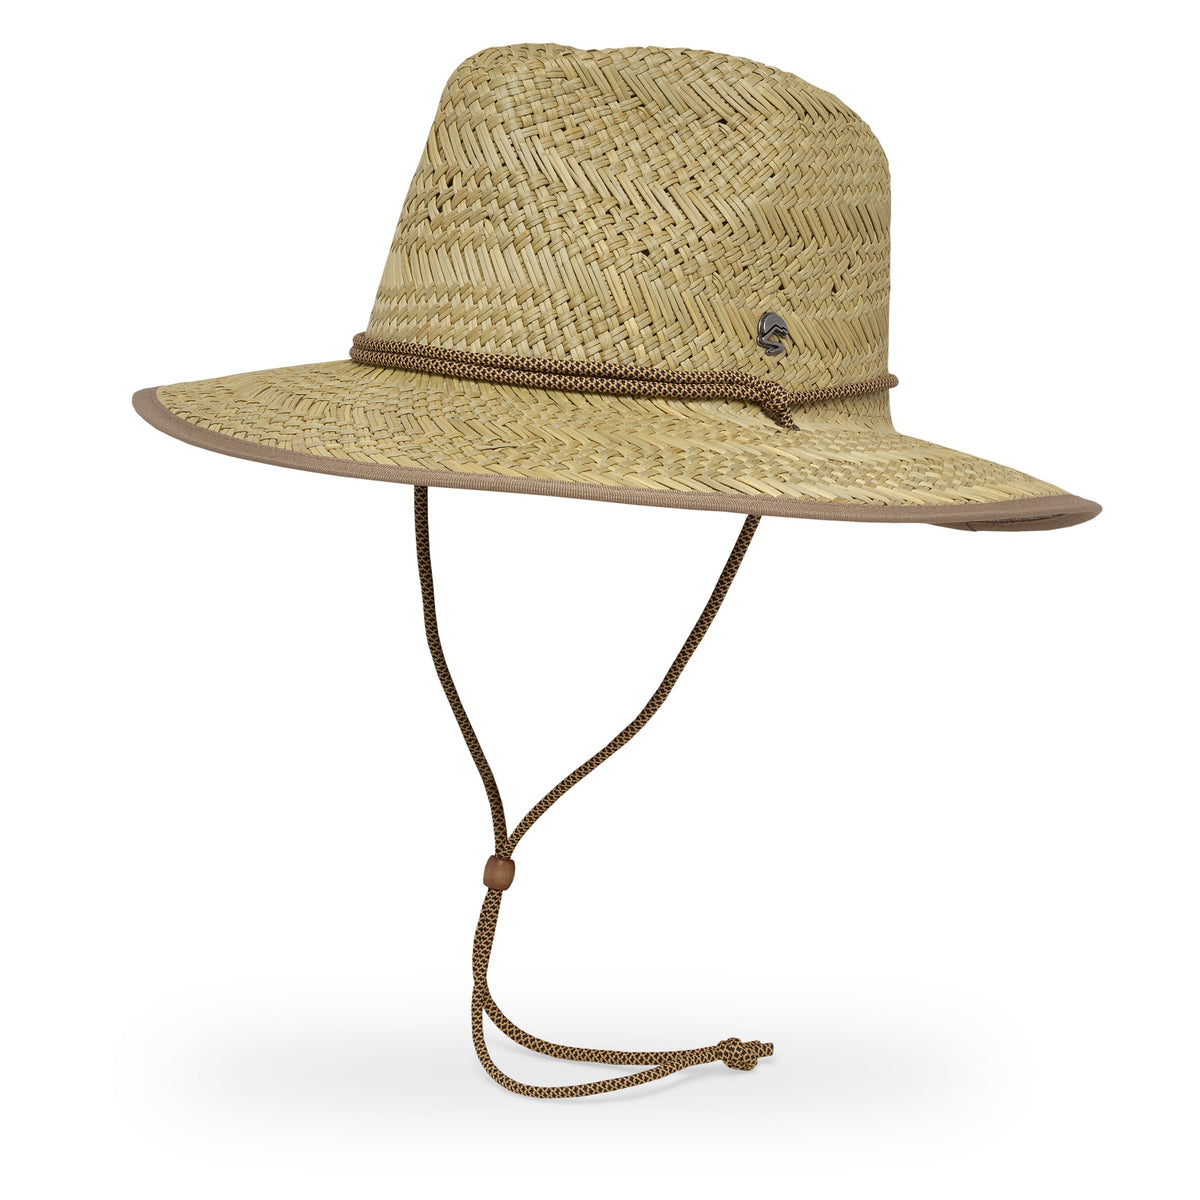 BIG SIZE STRAW HAT WITH CHIN STRING FOR *FARMING FISHING BEACH